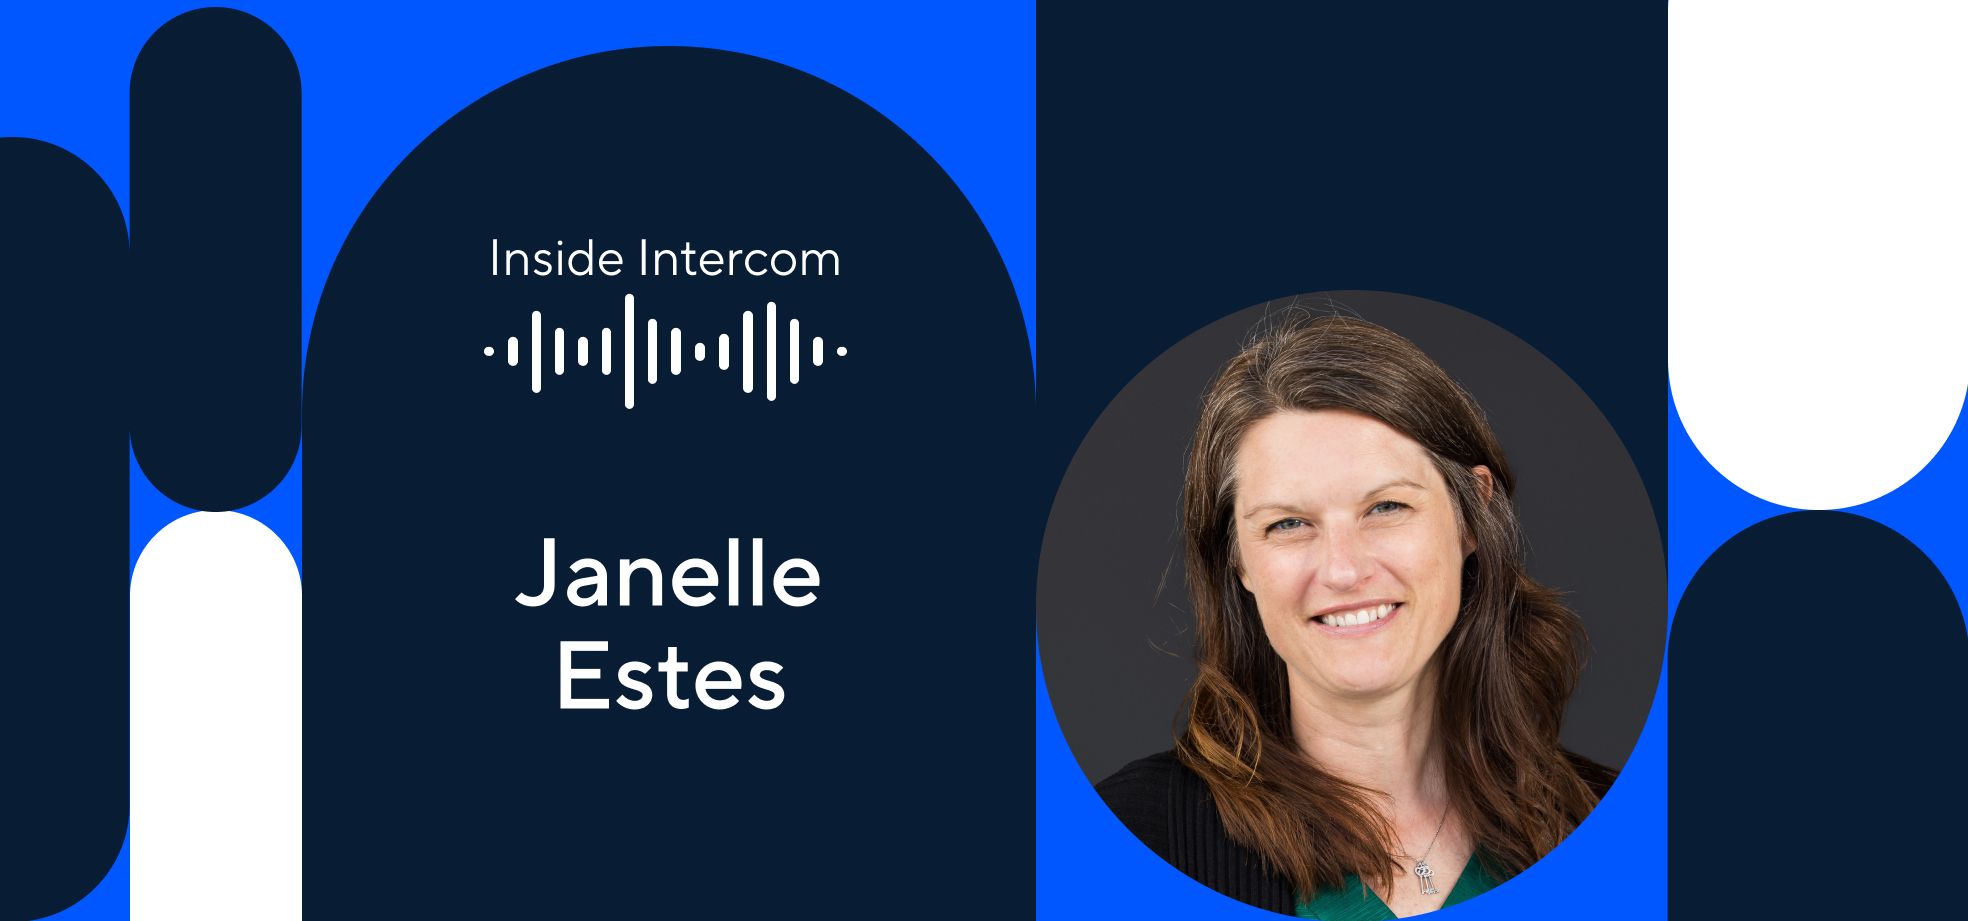 UserTesting’s Janelle Estes on using human insight to create memorable experiences